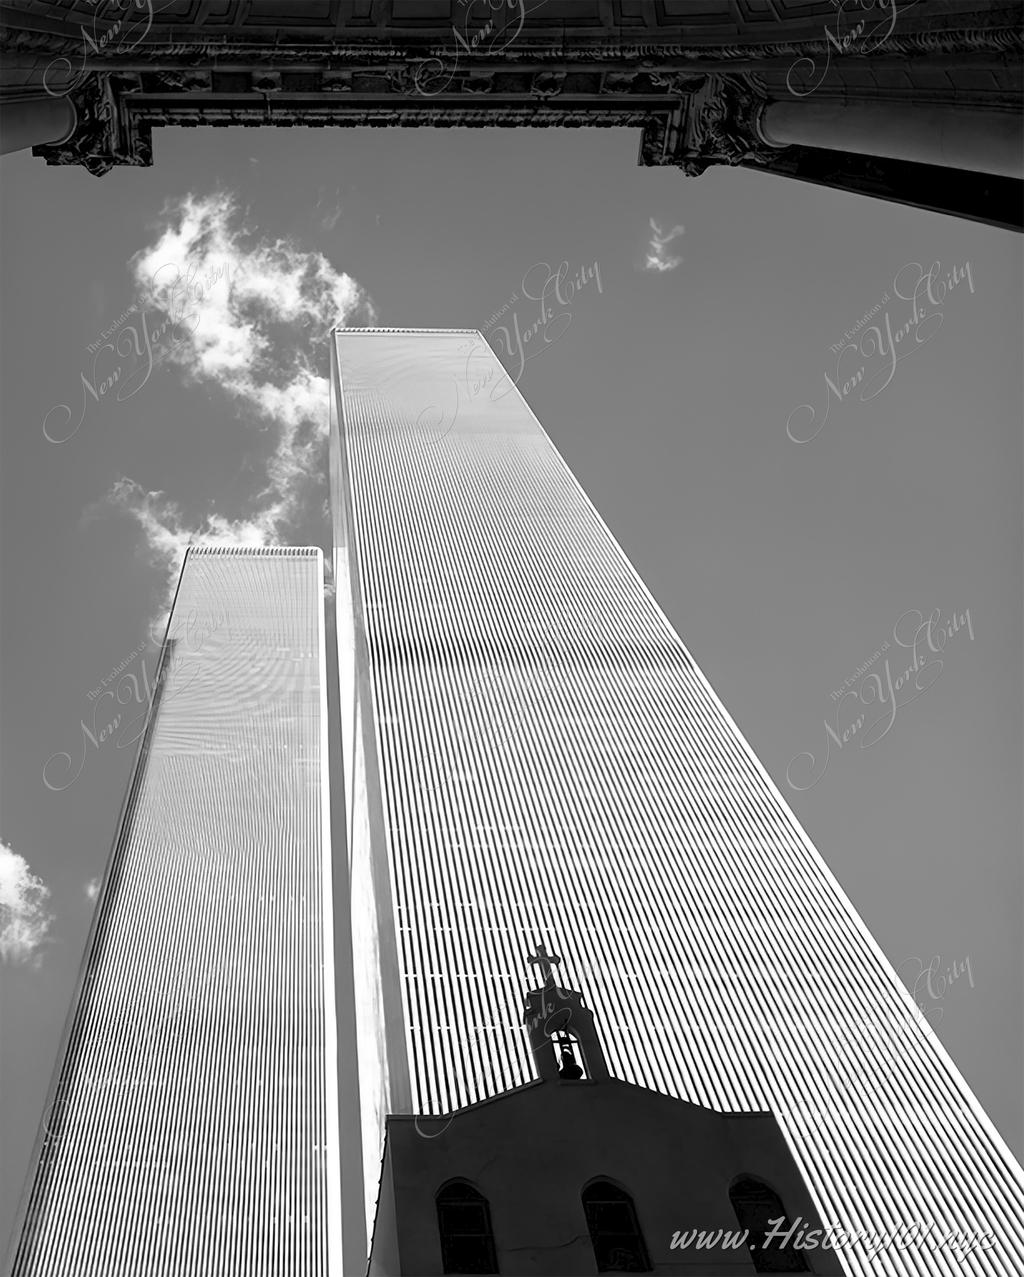 Photograph of the World Trade Center's Twin Towers with the silhouette of Saint Nicholas Orthodox Church in the foreground.